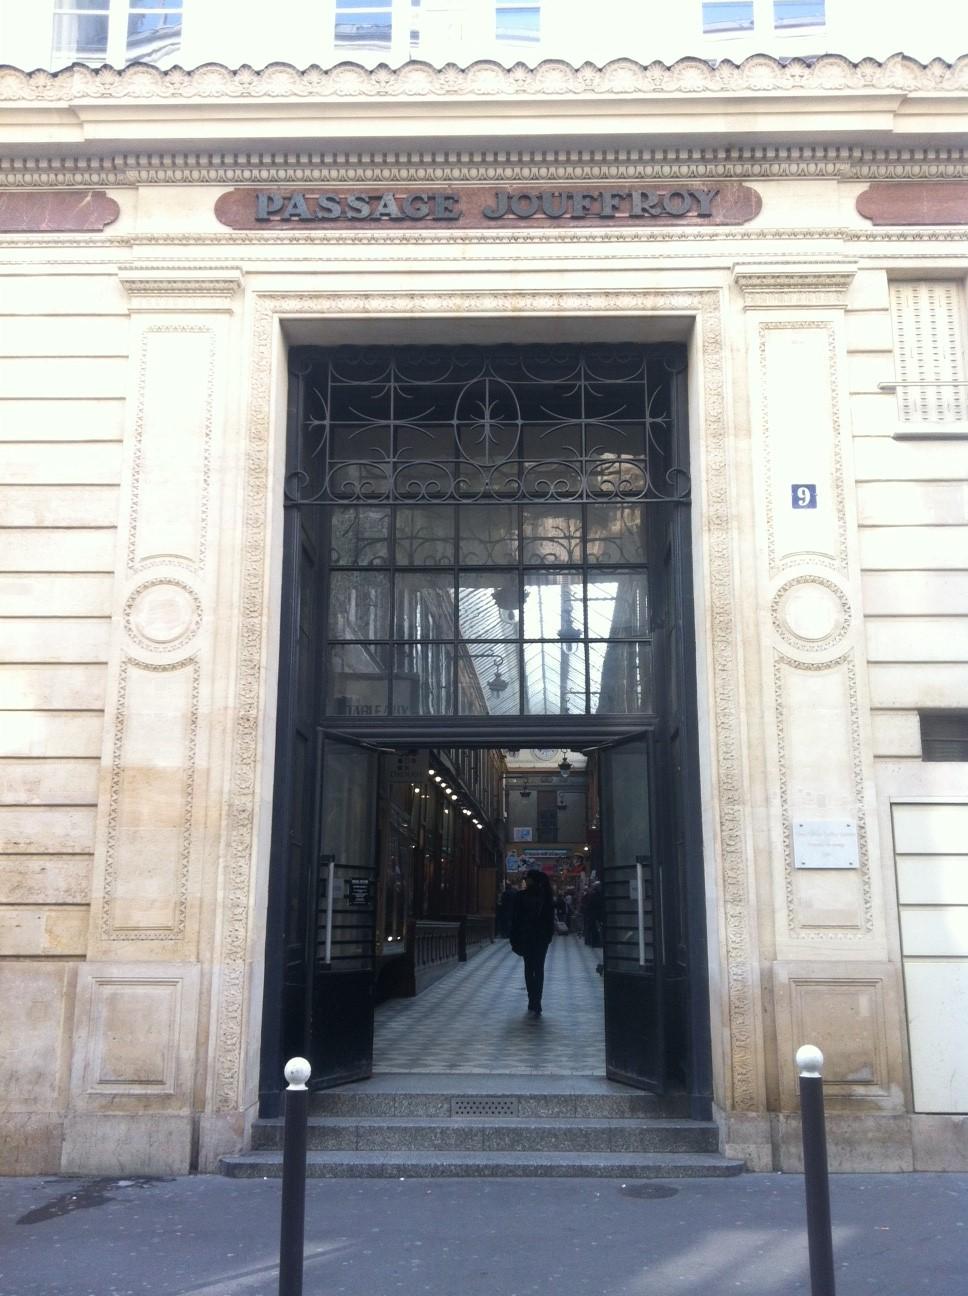 Cover image of this place Passage Jouffroy